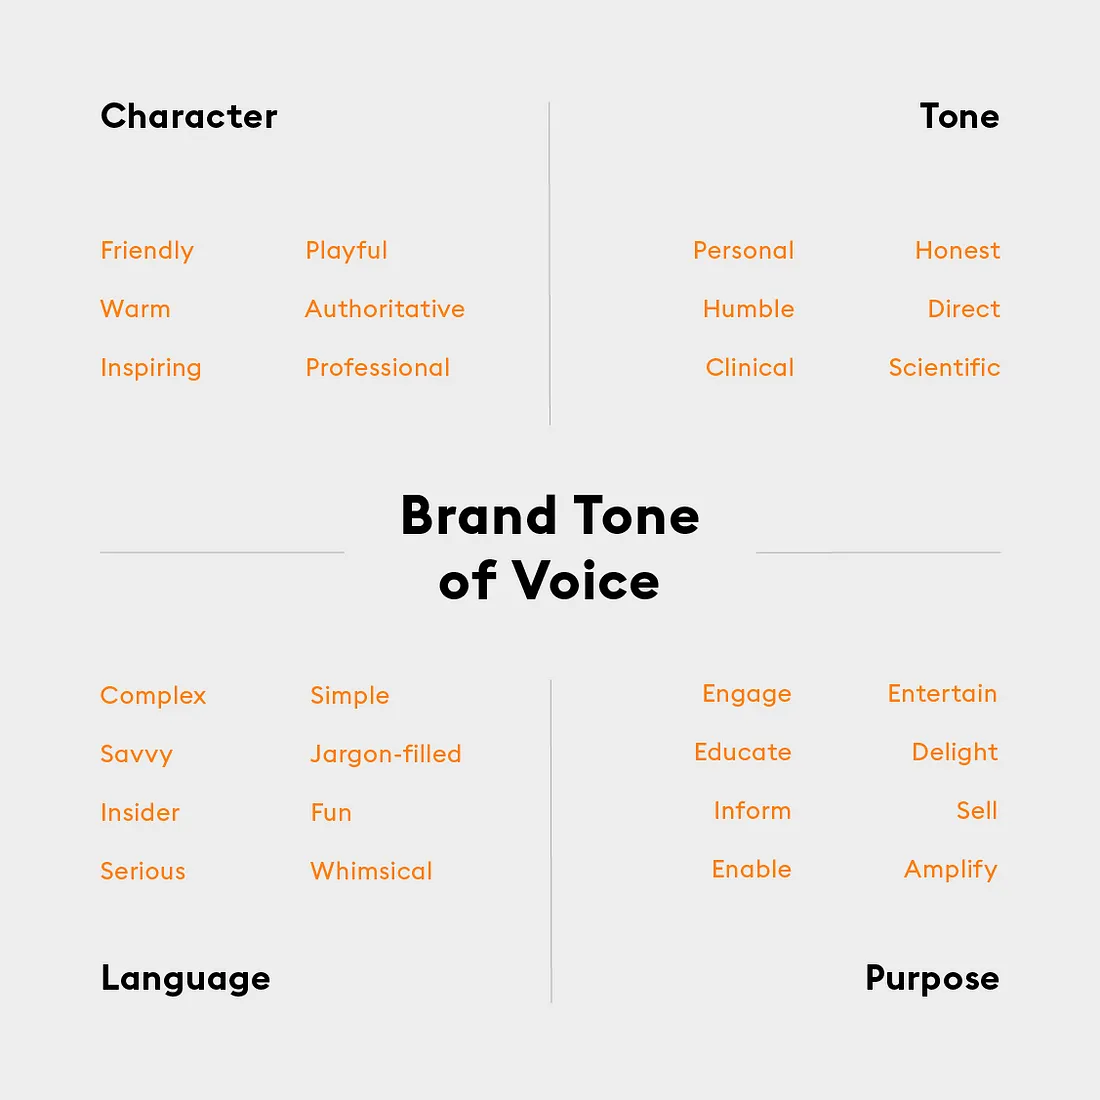 How to develop brand tone of voice